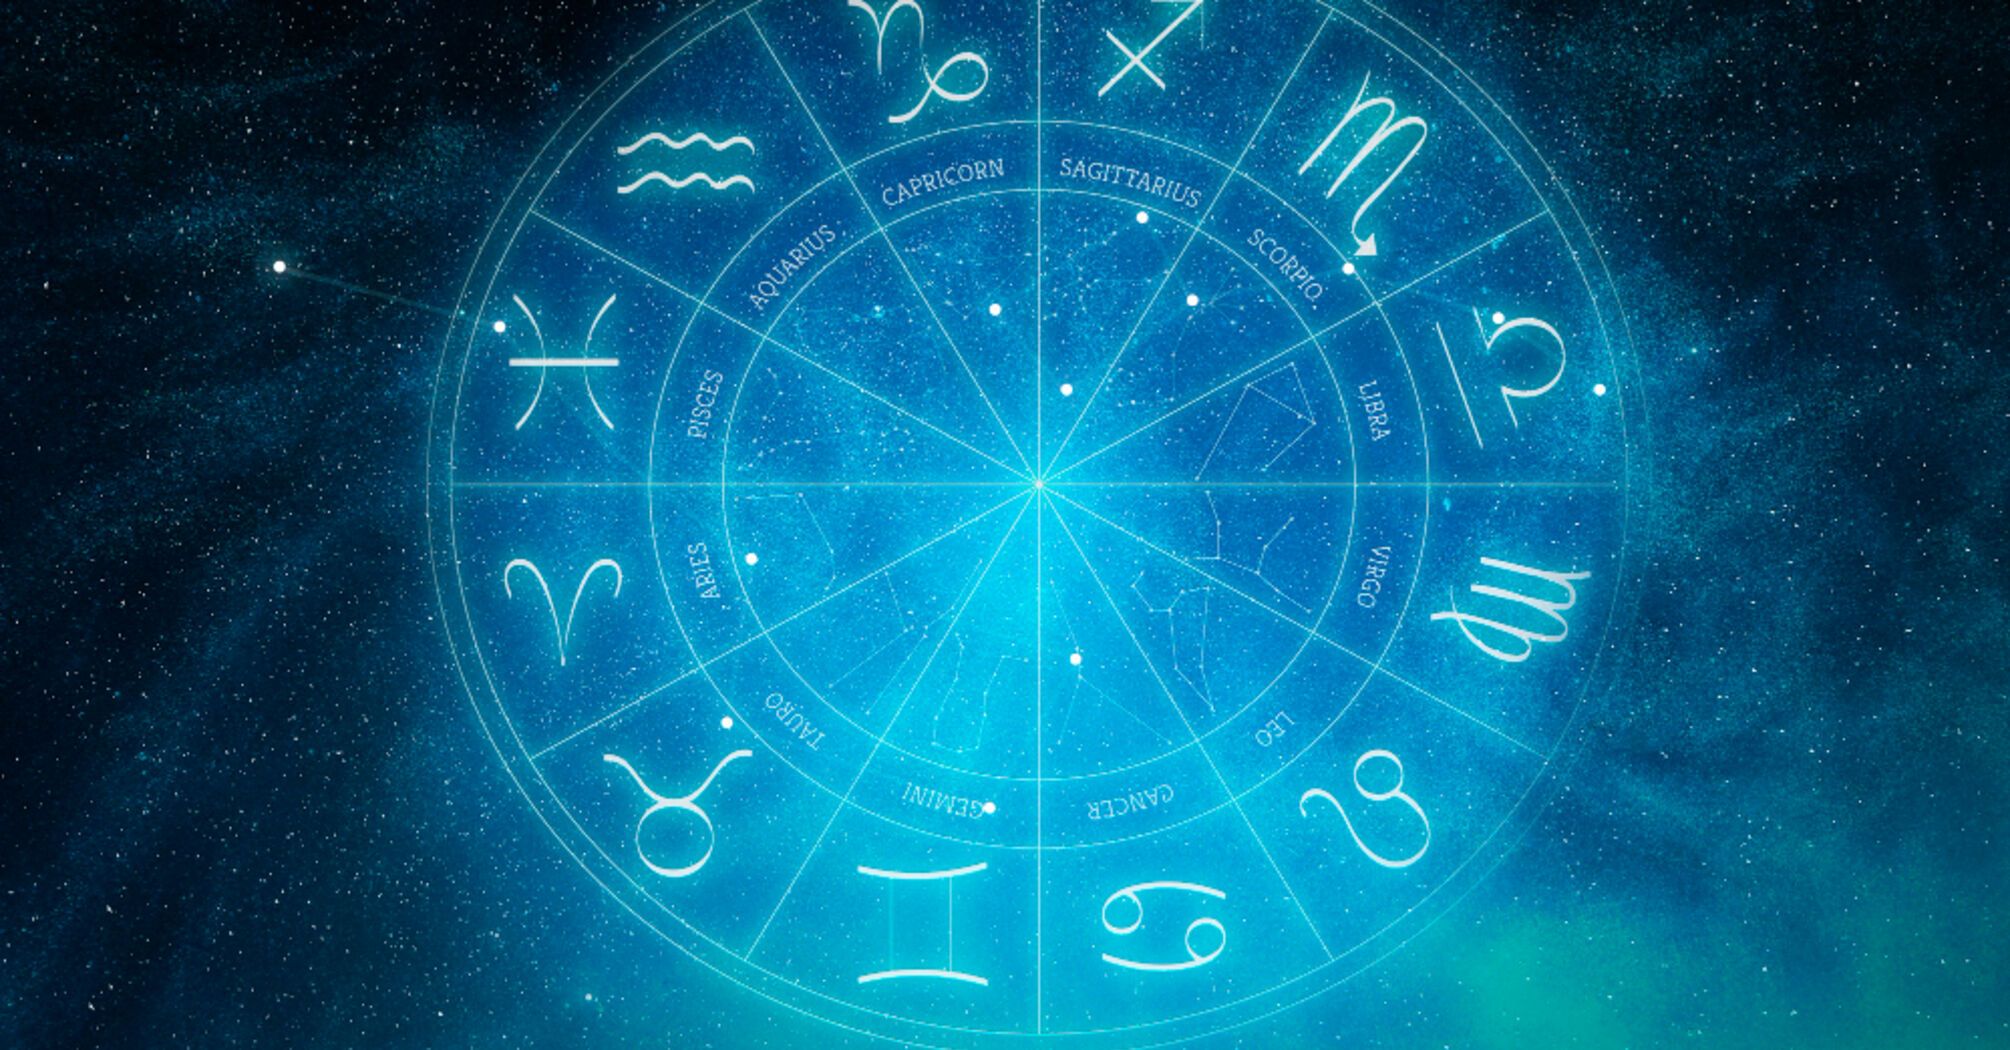 A day of new acquaintances and unexpected meetings: horoscope for all zodiac signs for April 22